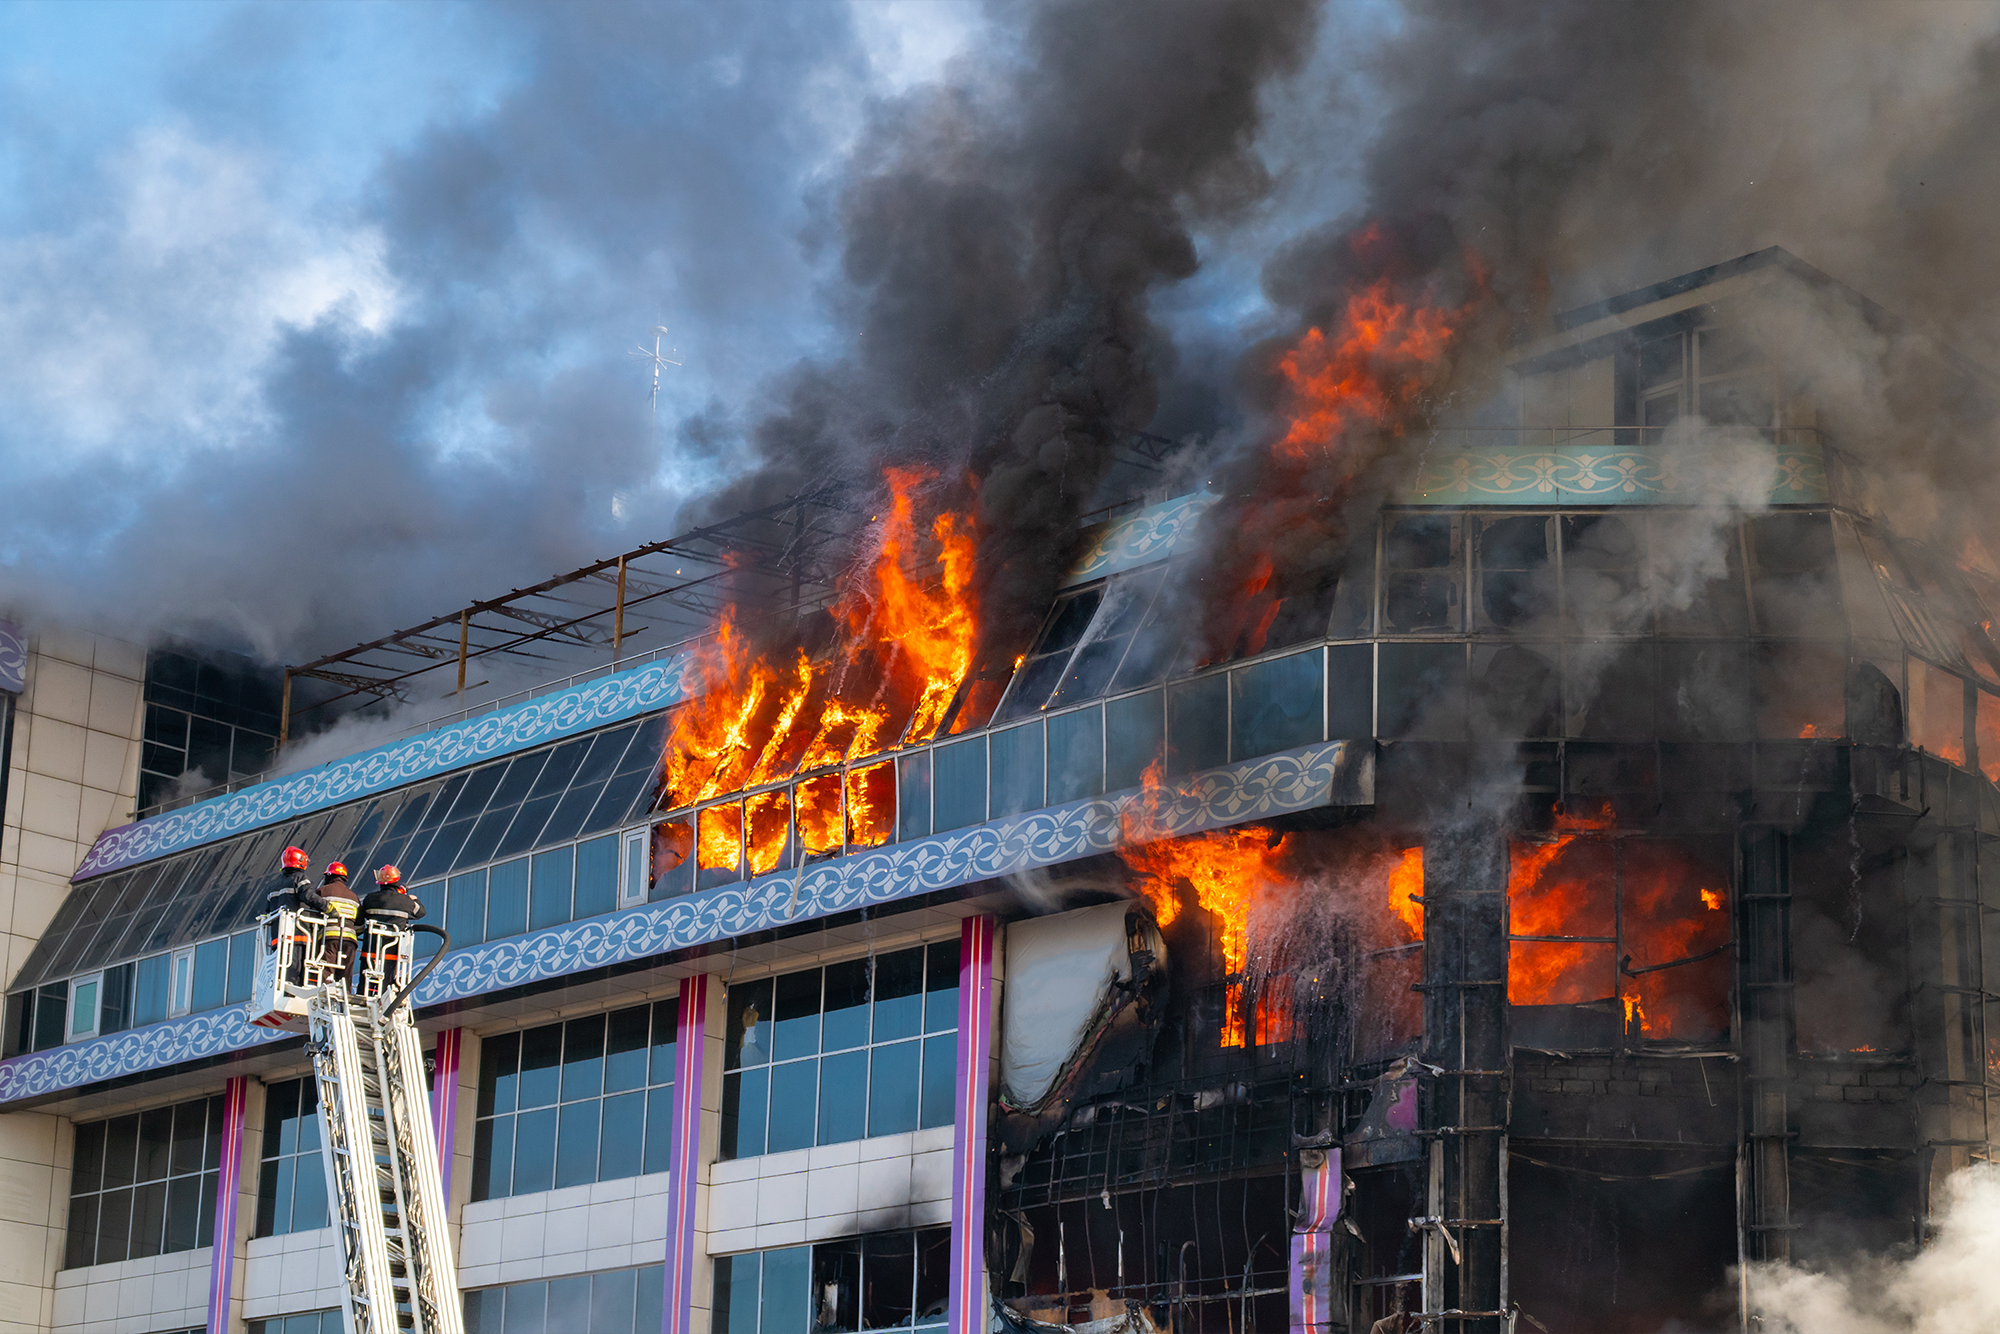 A building on fire with firefighters on a ladder trying to extinguish the disaster. 